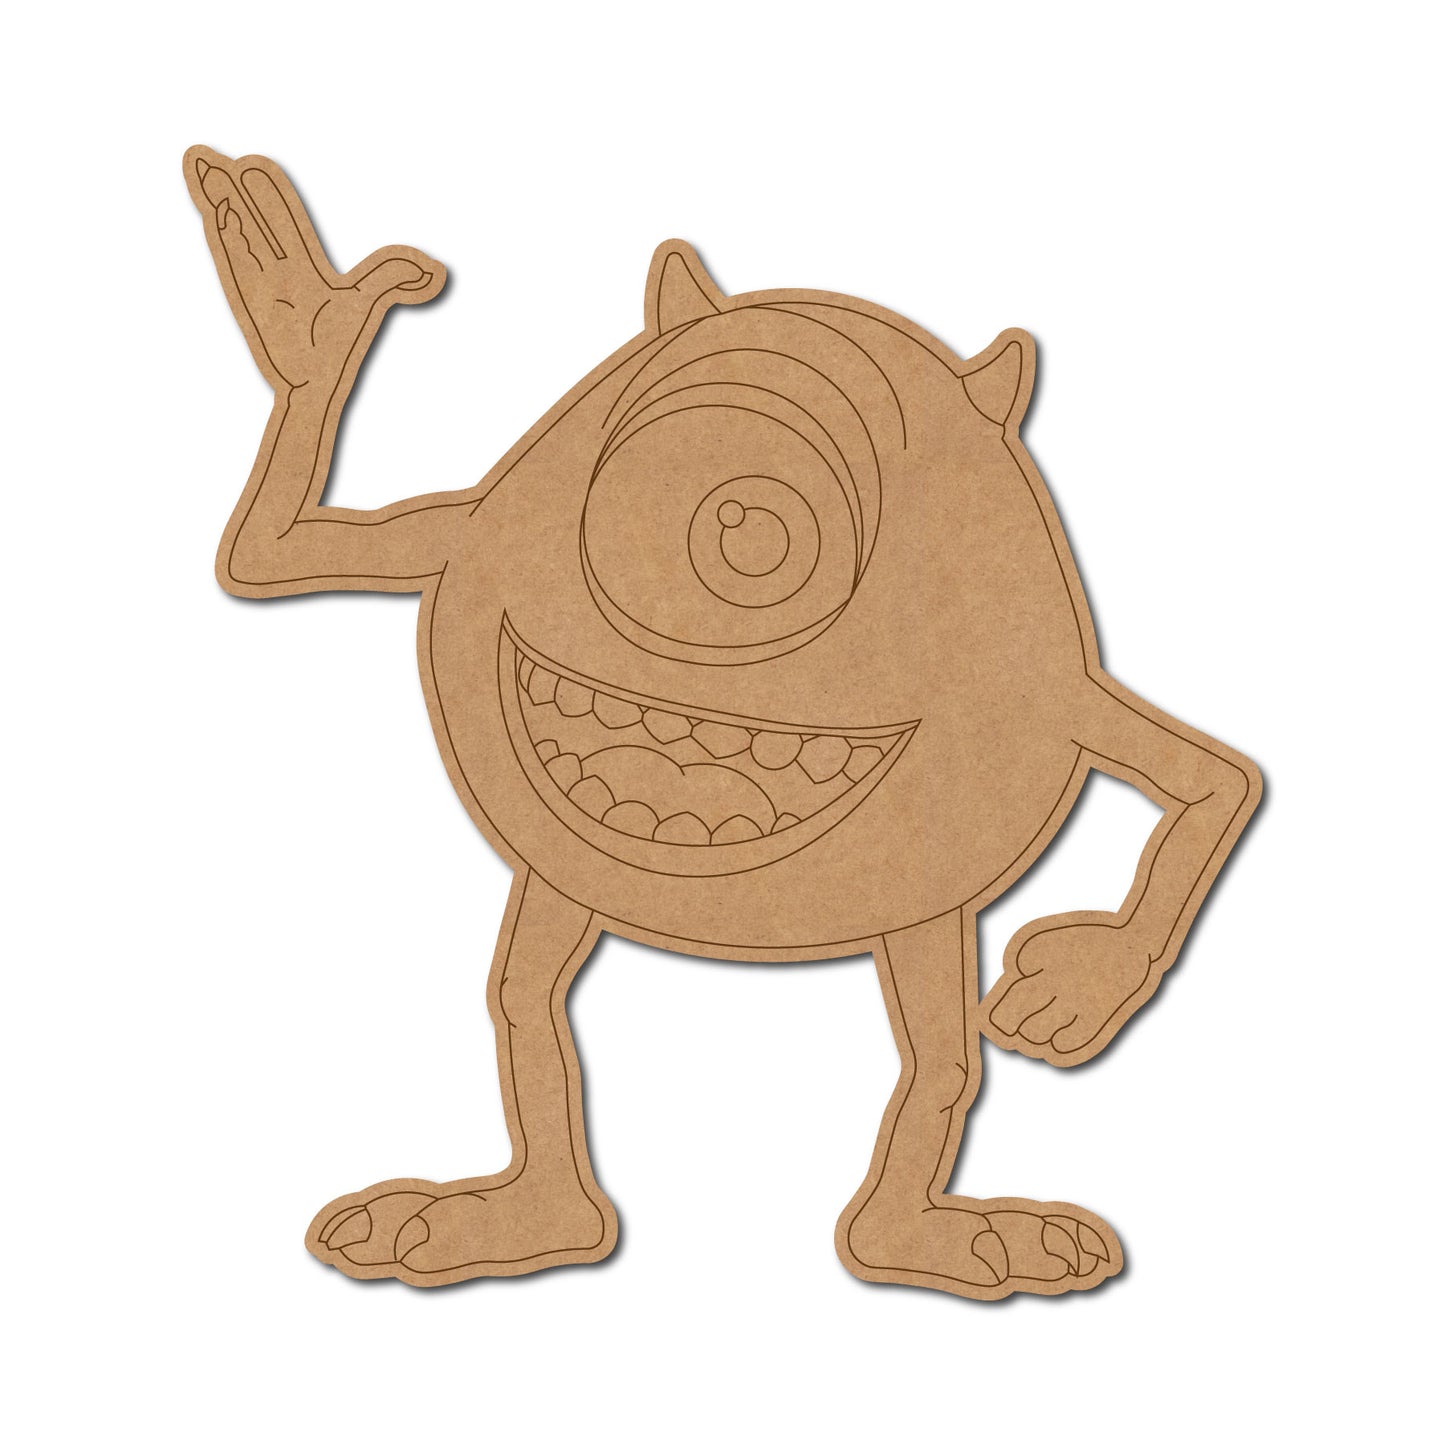 Mike Monsters Inc. Disney Pre Marked MDF Design 2